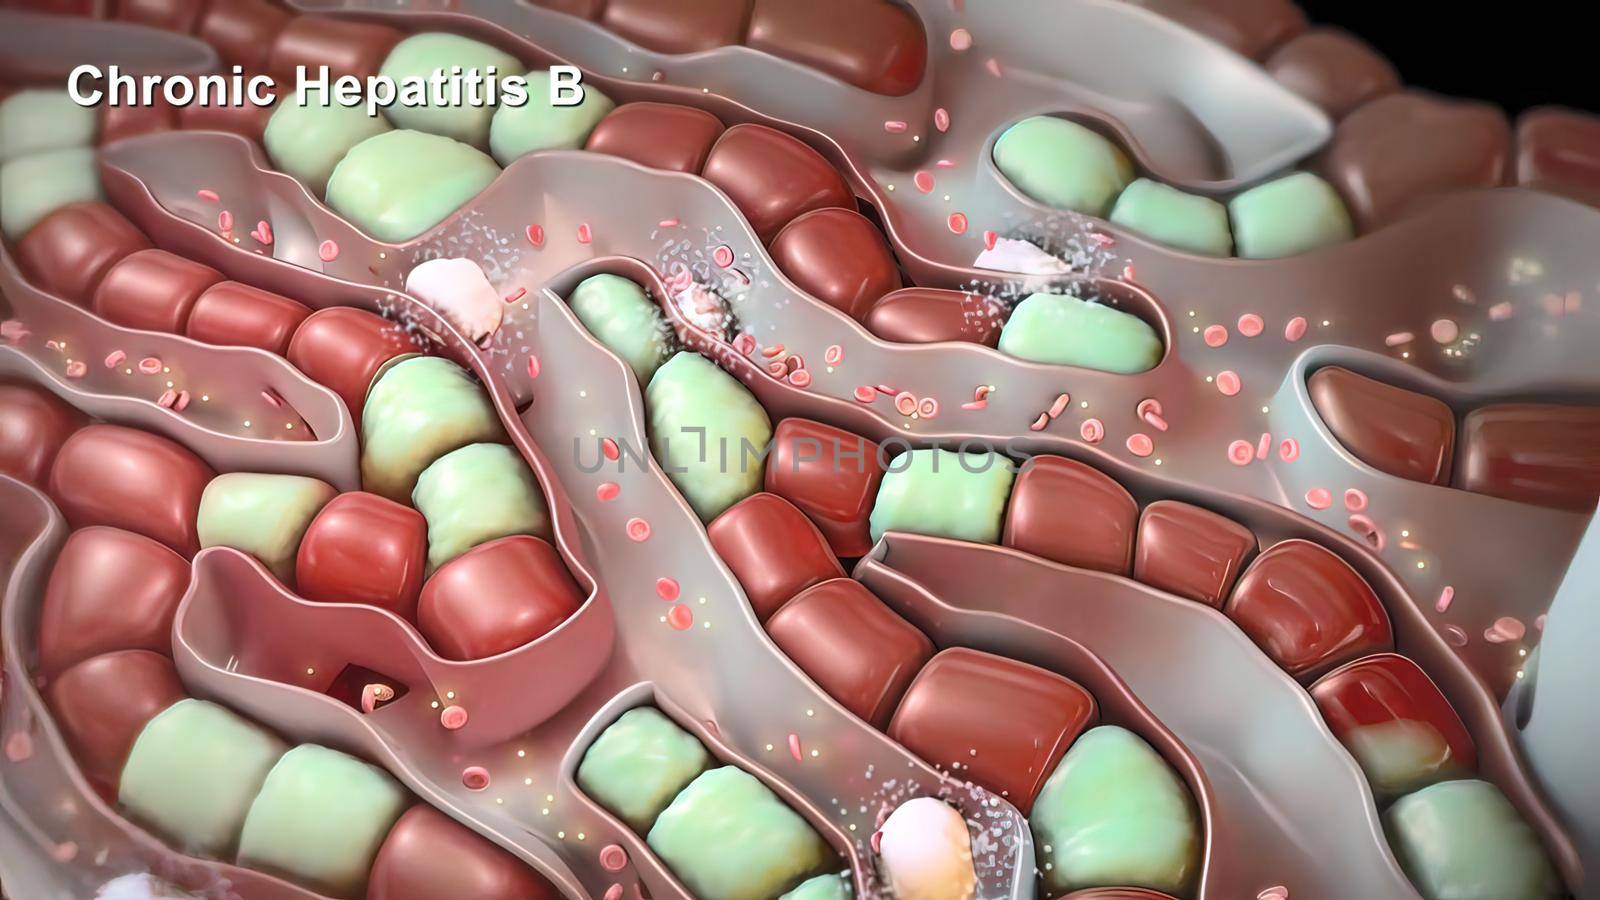 Irritation and swelling of the liver from infection with the hepatitis B virus 3D illustration